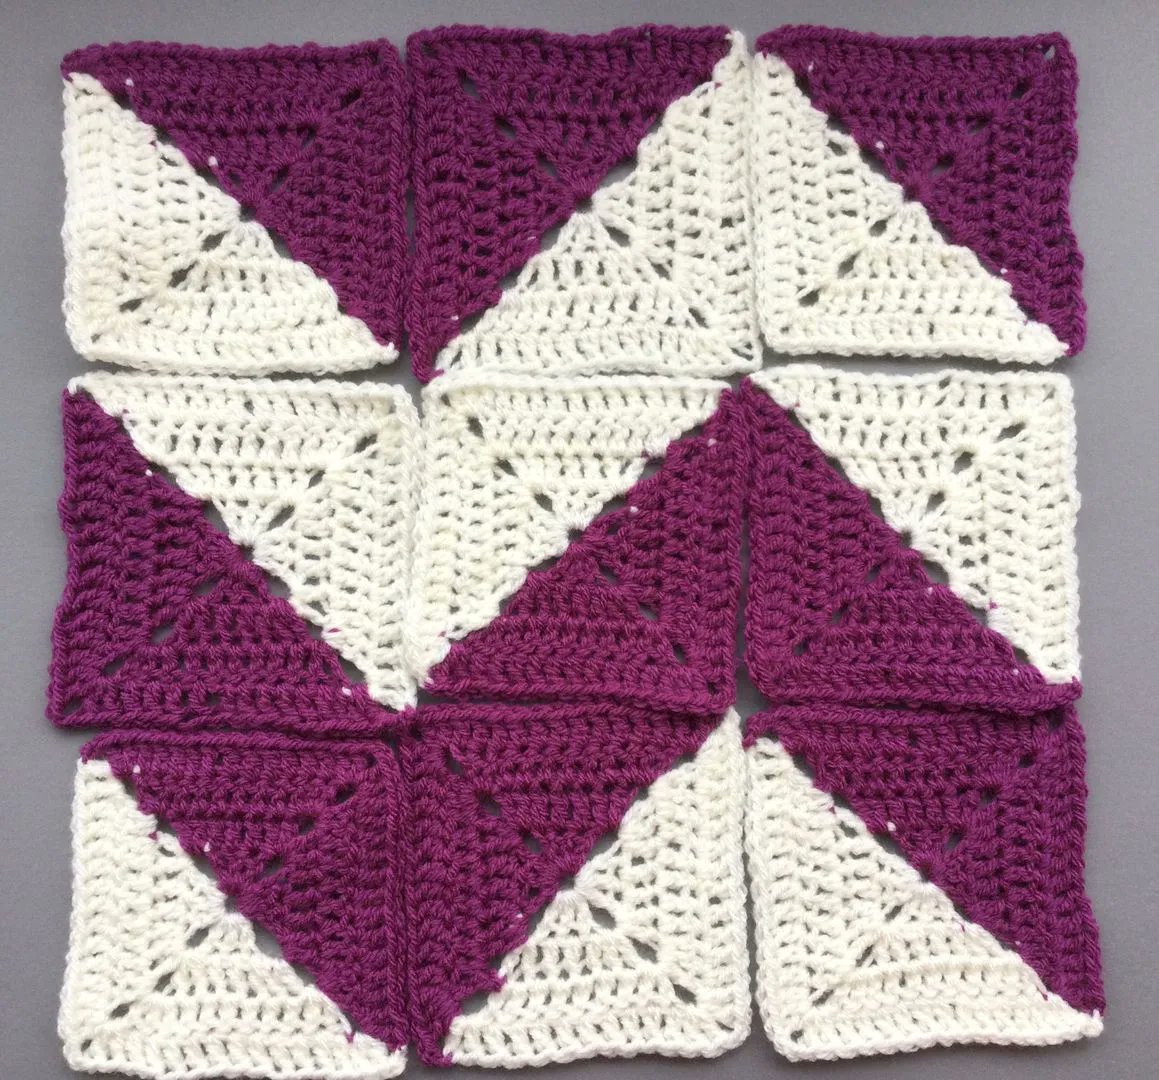 #crochet #halfsquaretriangles #crochetproject

This project is growing slightly now - I have HSTs in several colours!